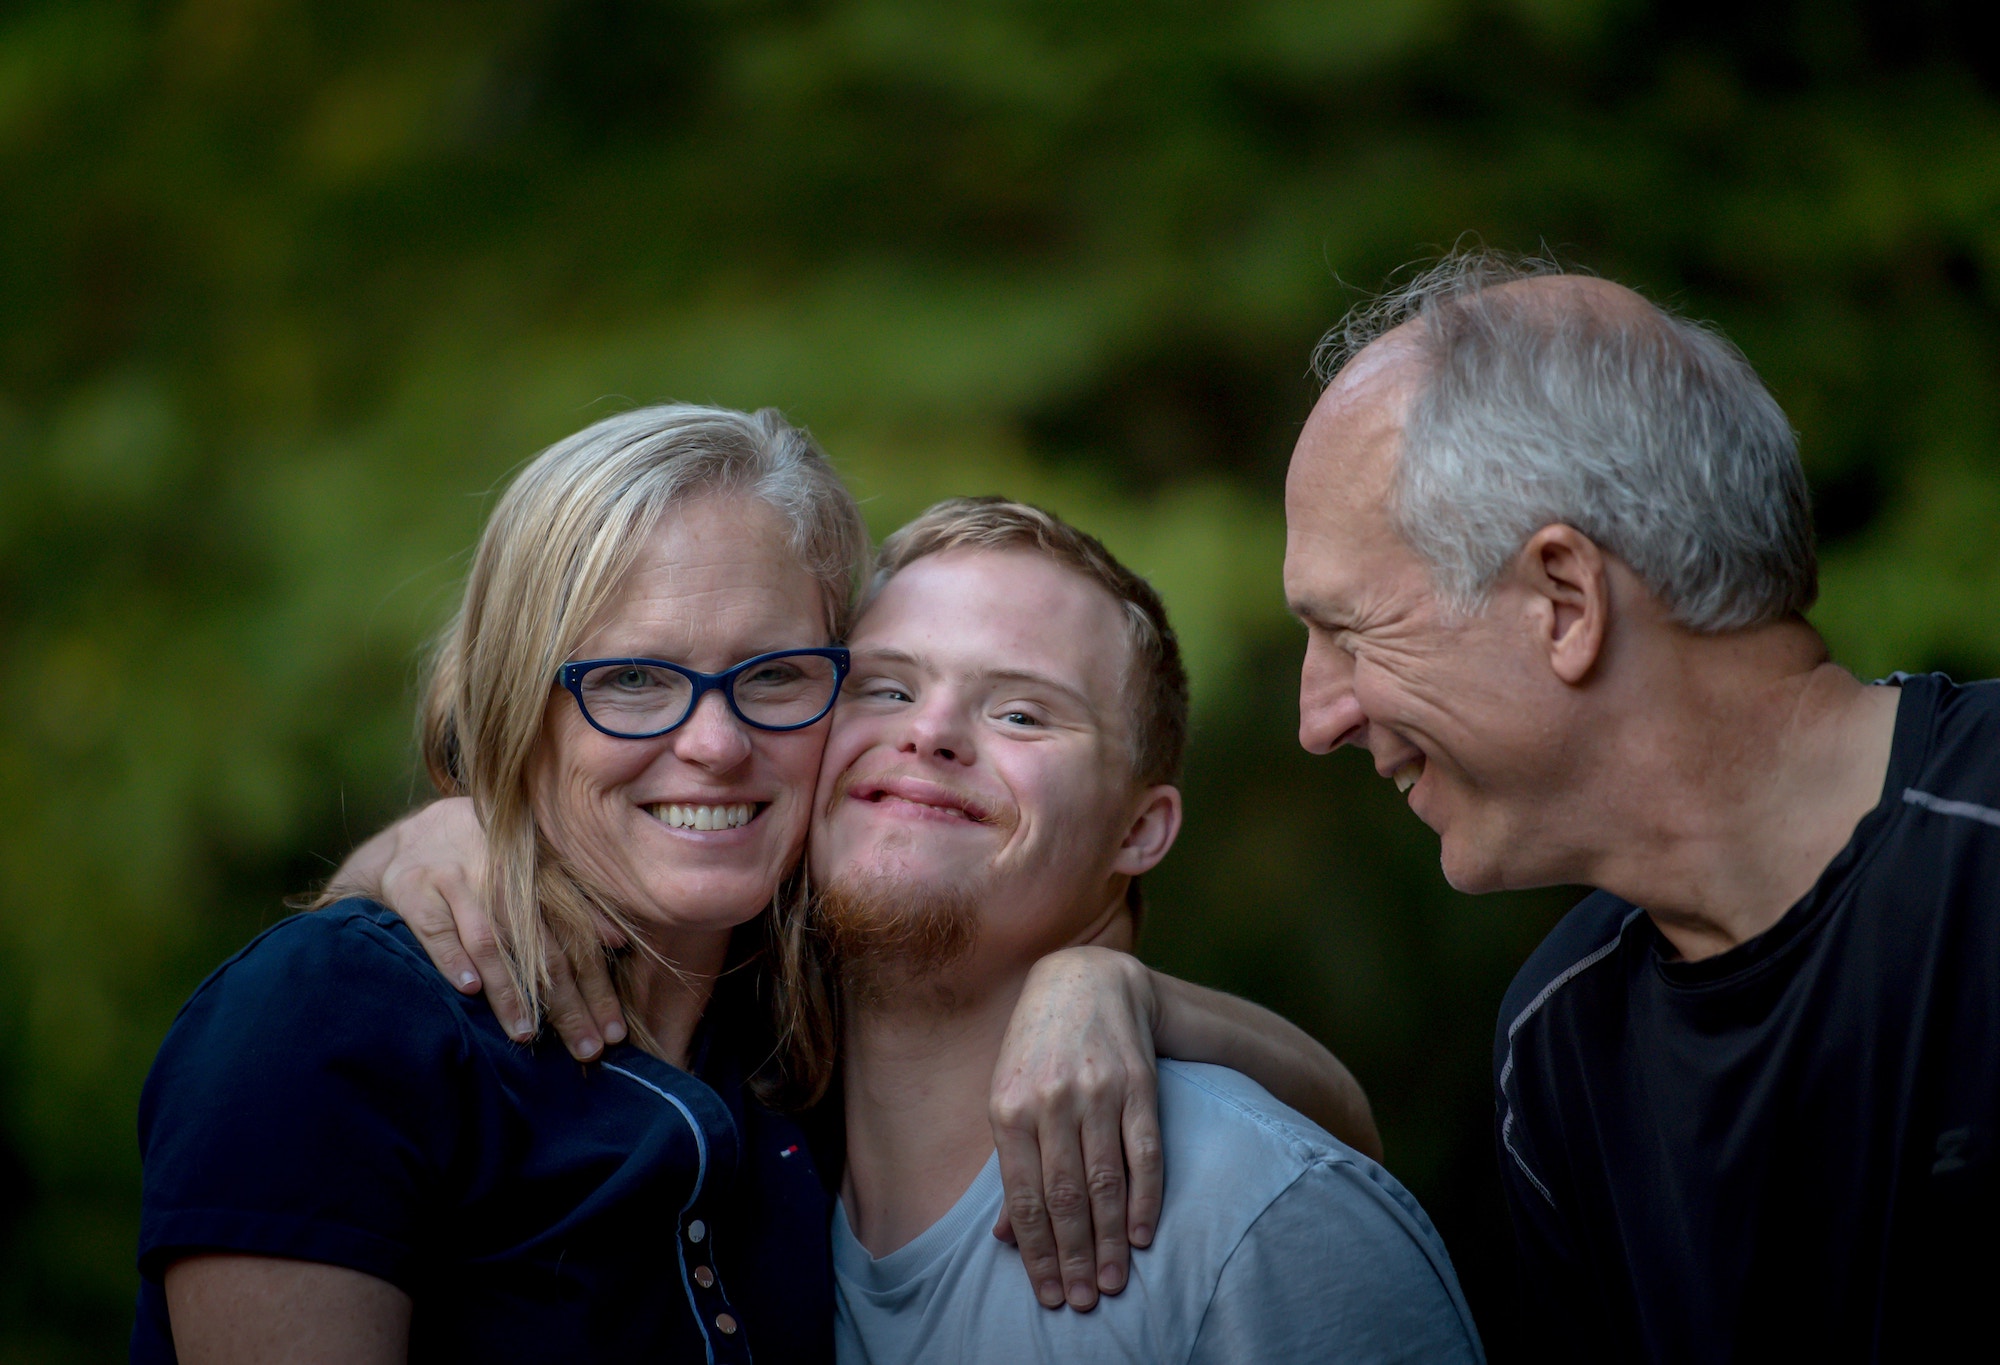 Family made up of a mother, father, and son, who has Down Syndrome, hug one another outside